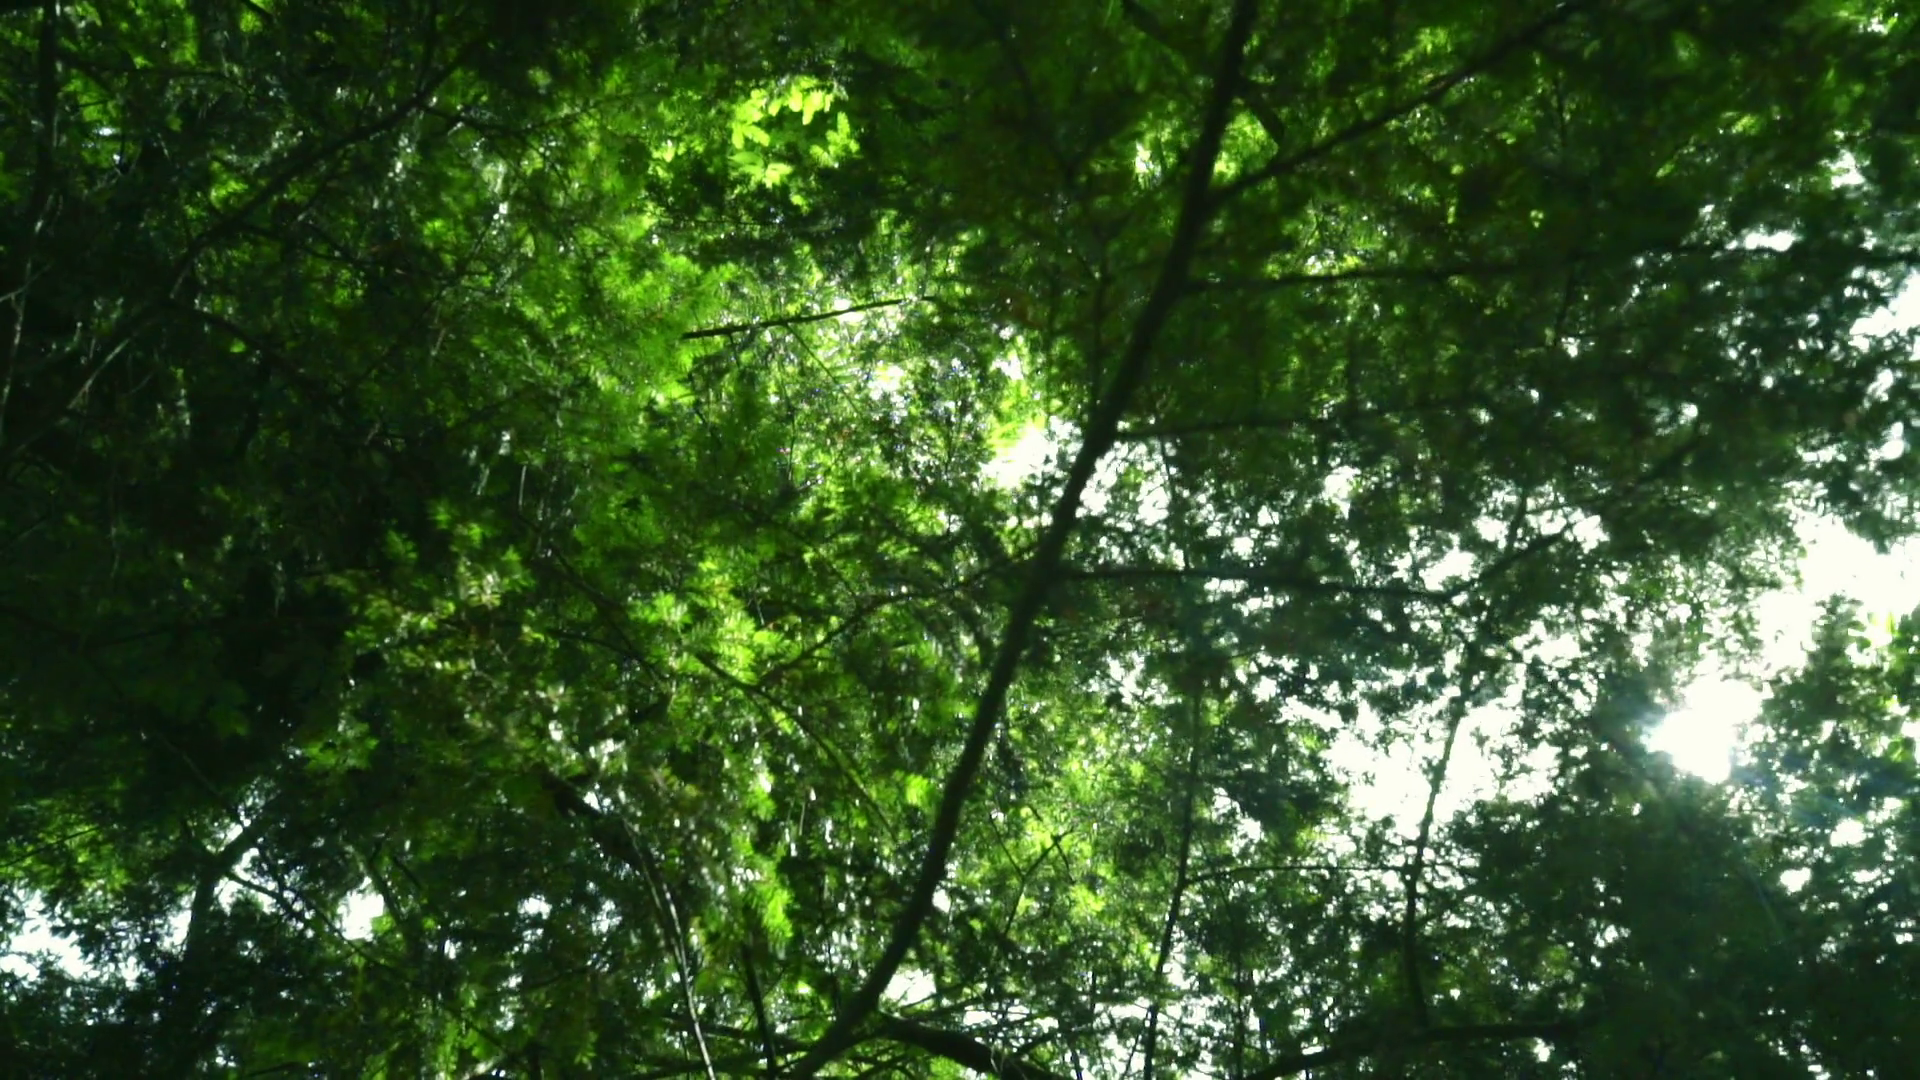 Sun rays shine through tree branches at summer. Green leaves